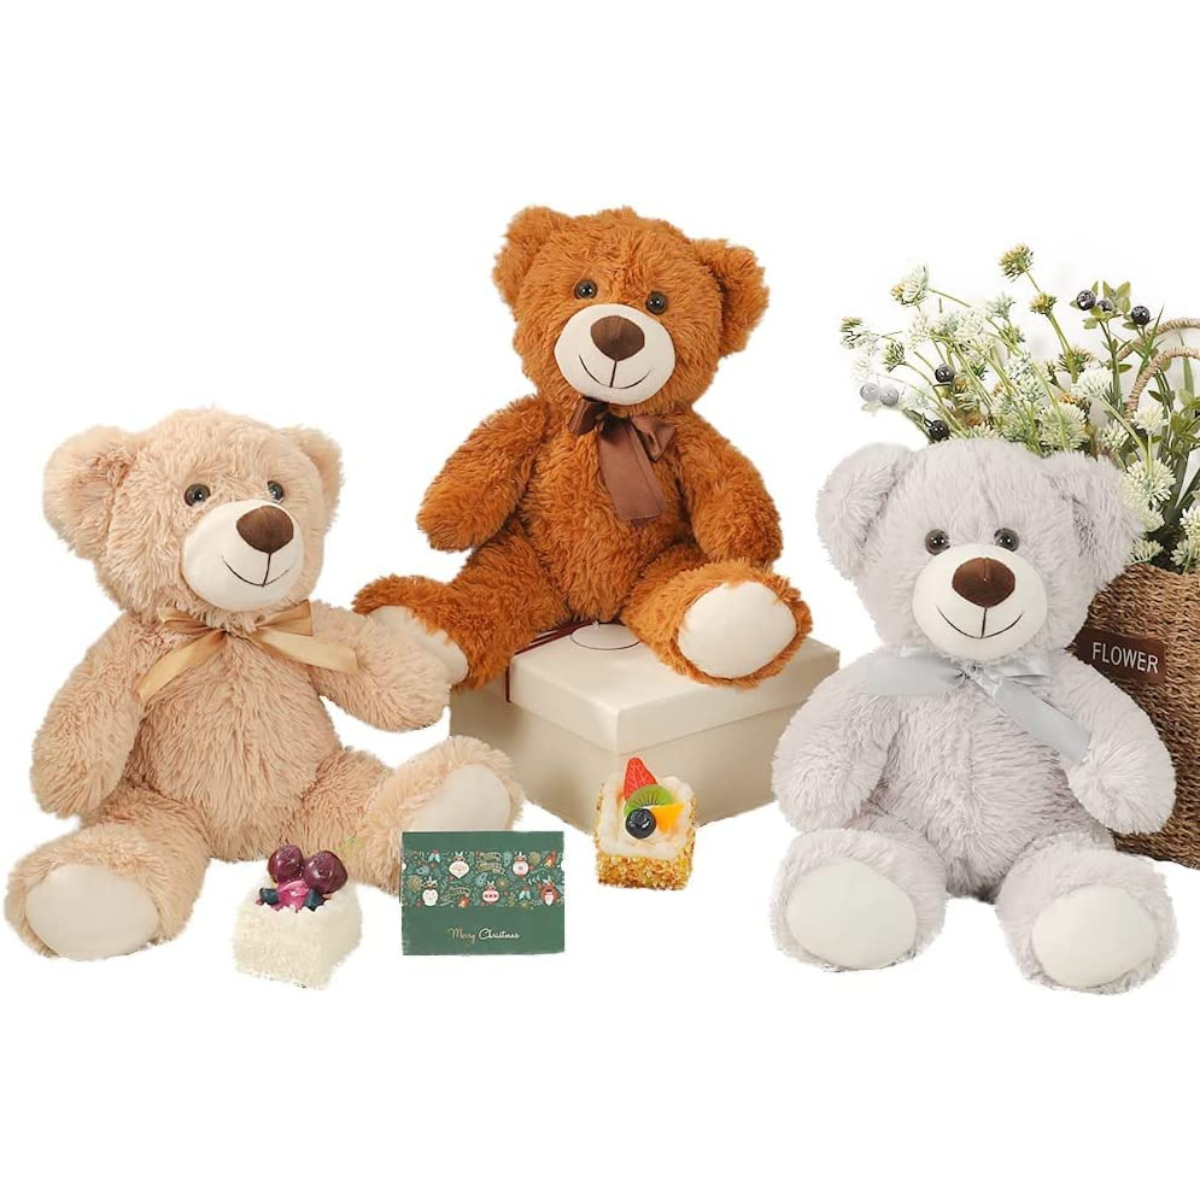 3-Pack Teddy Bear Stuffed Animals, 13.8 Inches